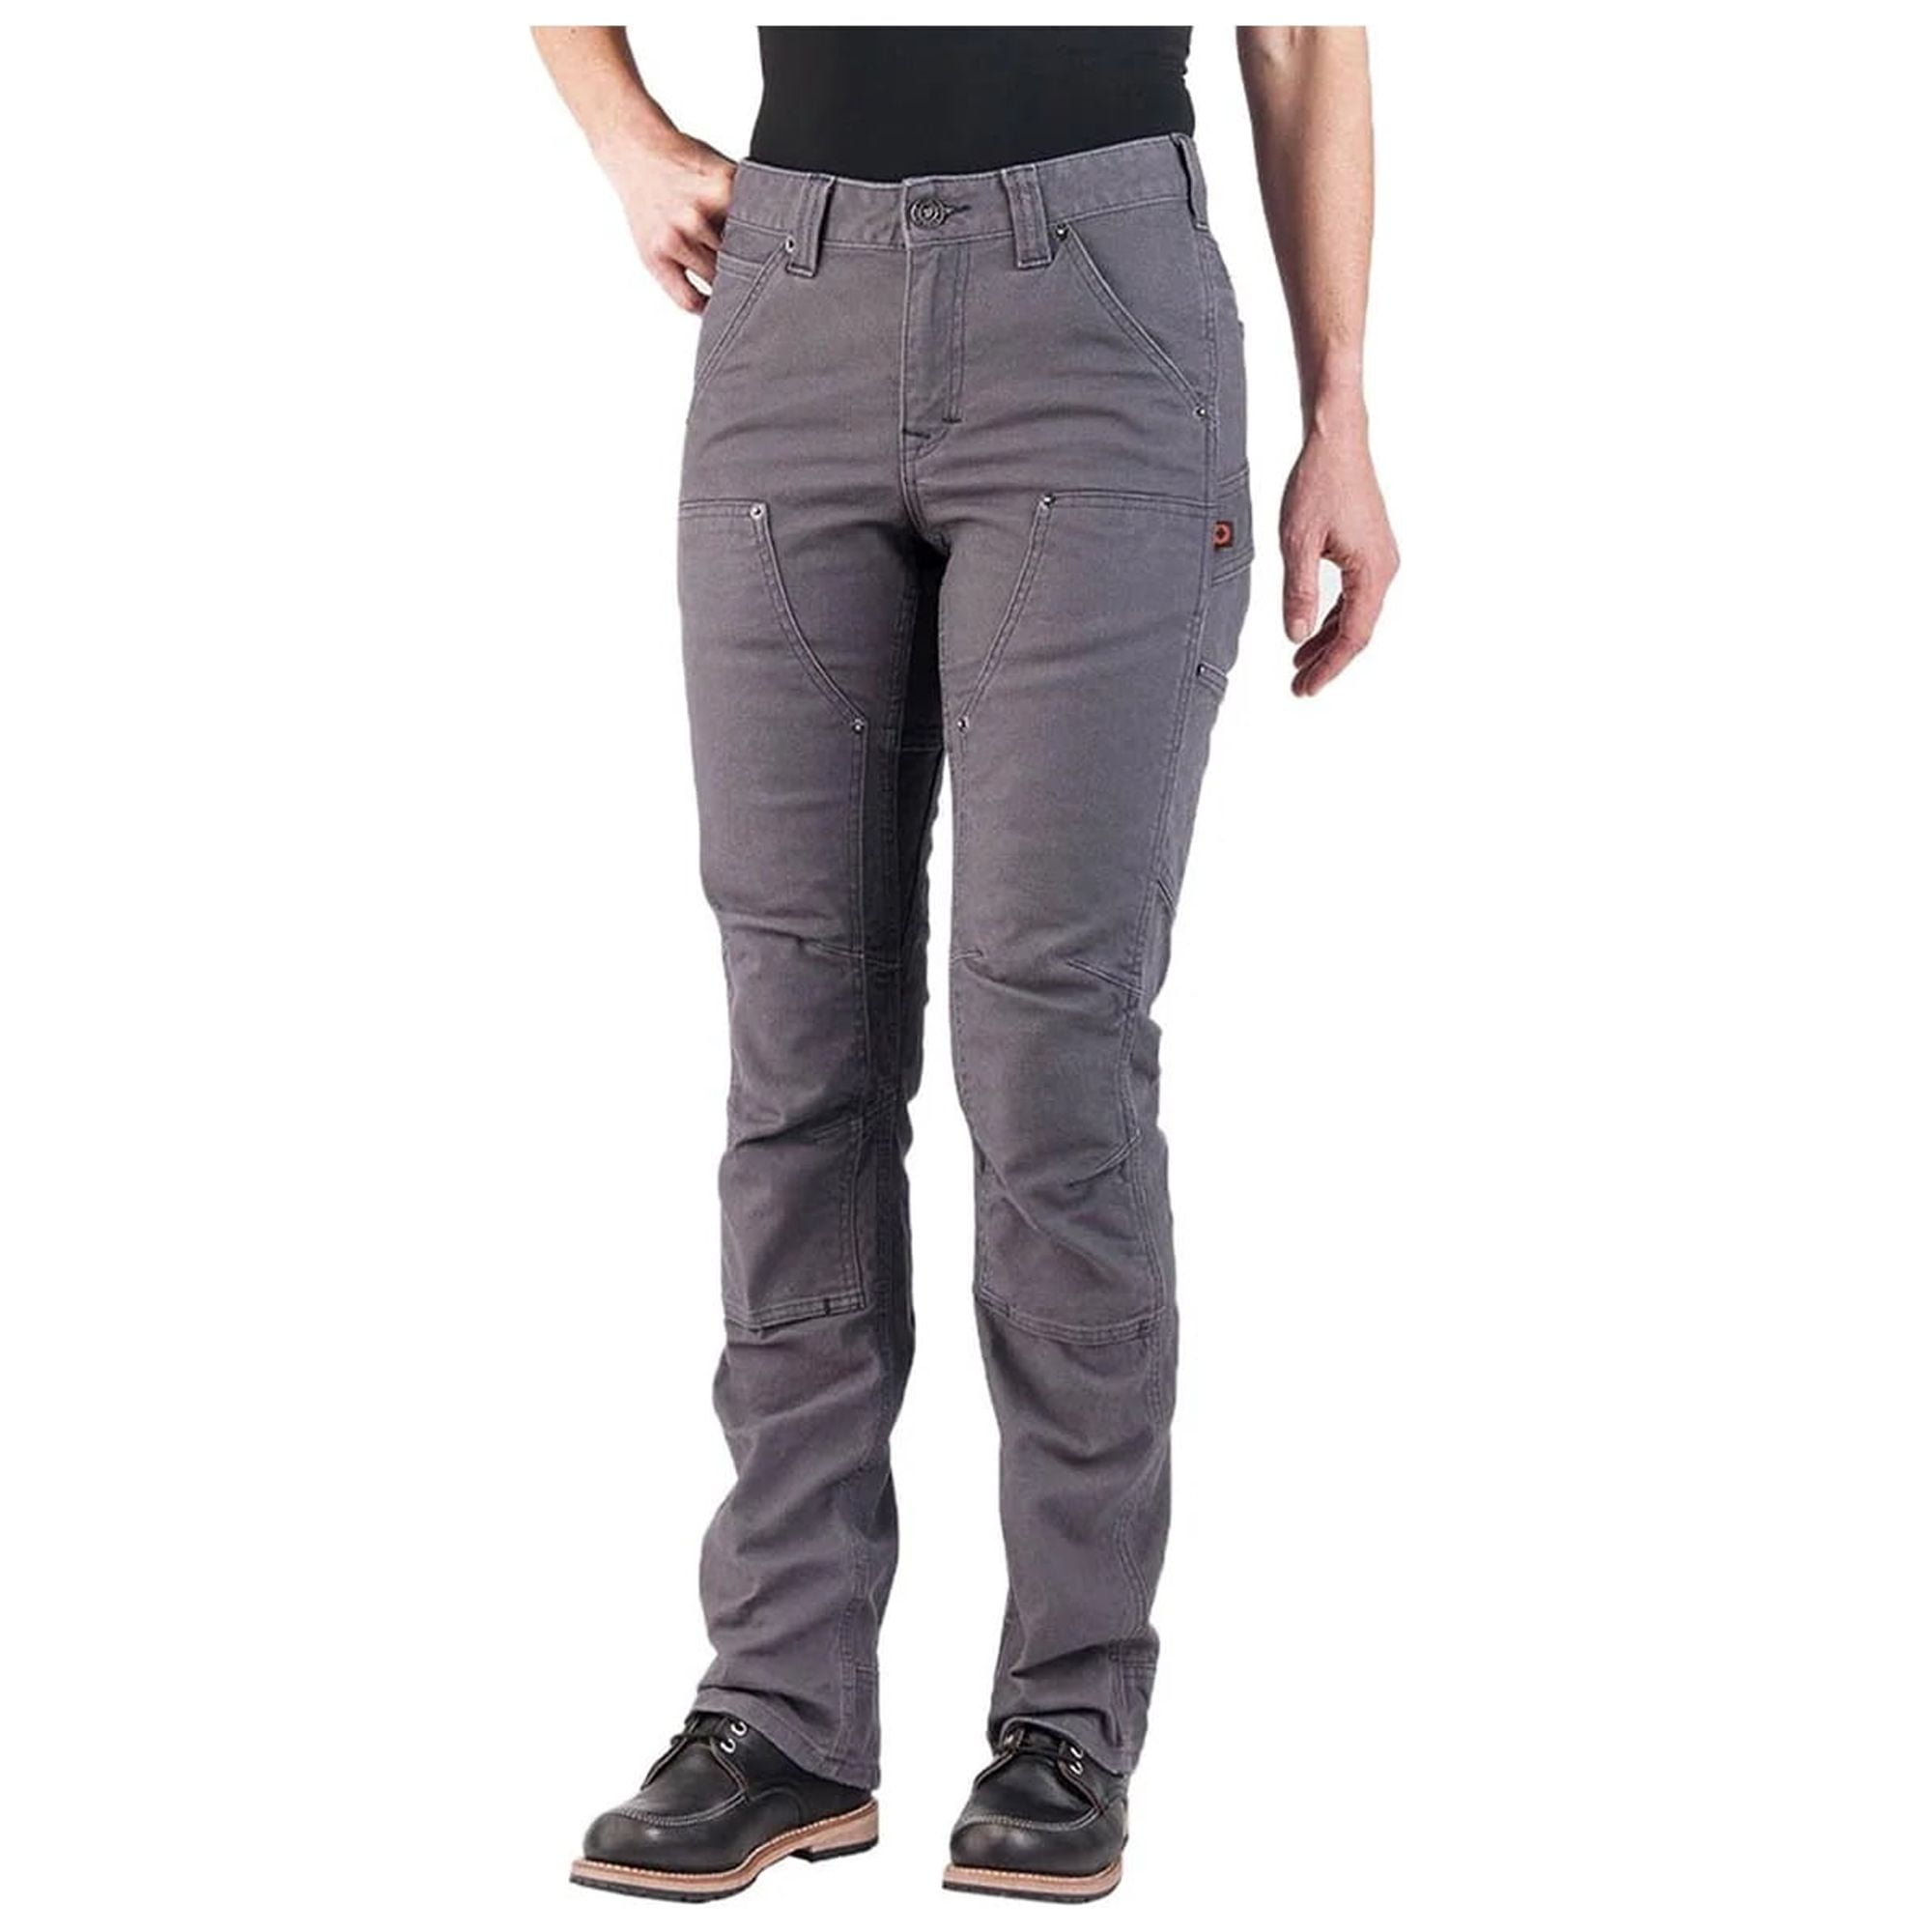 Dovetail Workwear Britt Utility, Straight Leg Fit, Cargo Pants for Women,  11 Functional Pockets, Grey Canvas